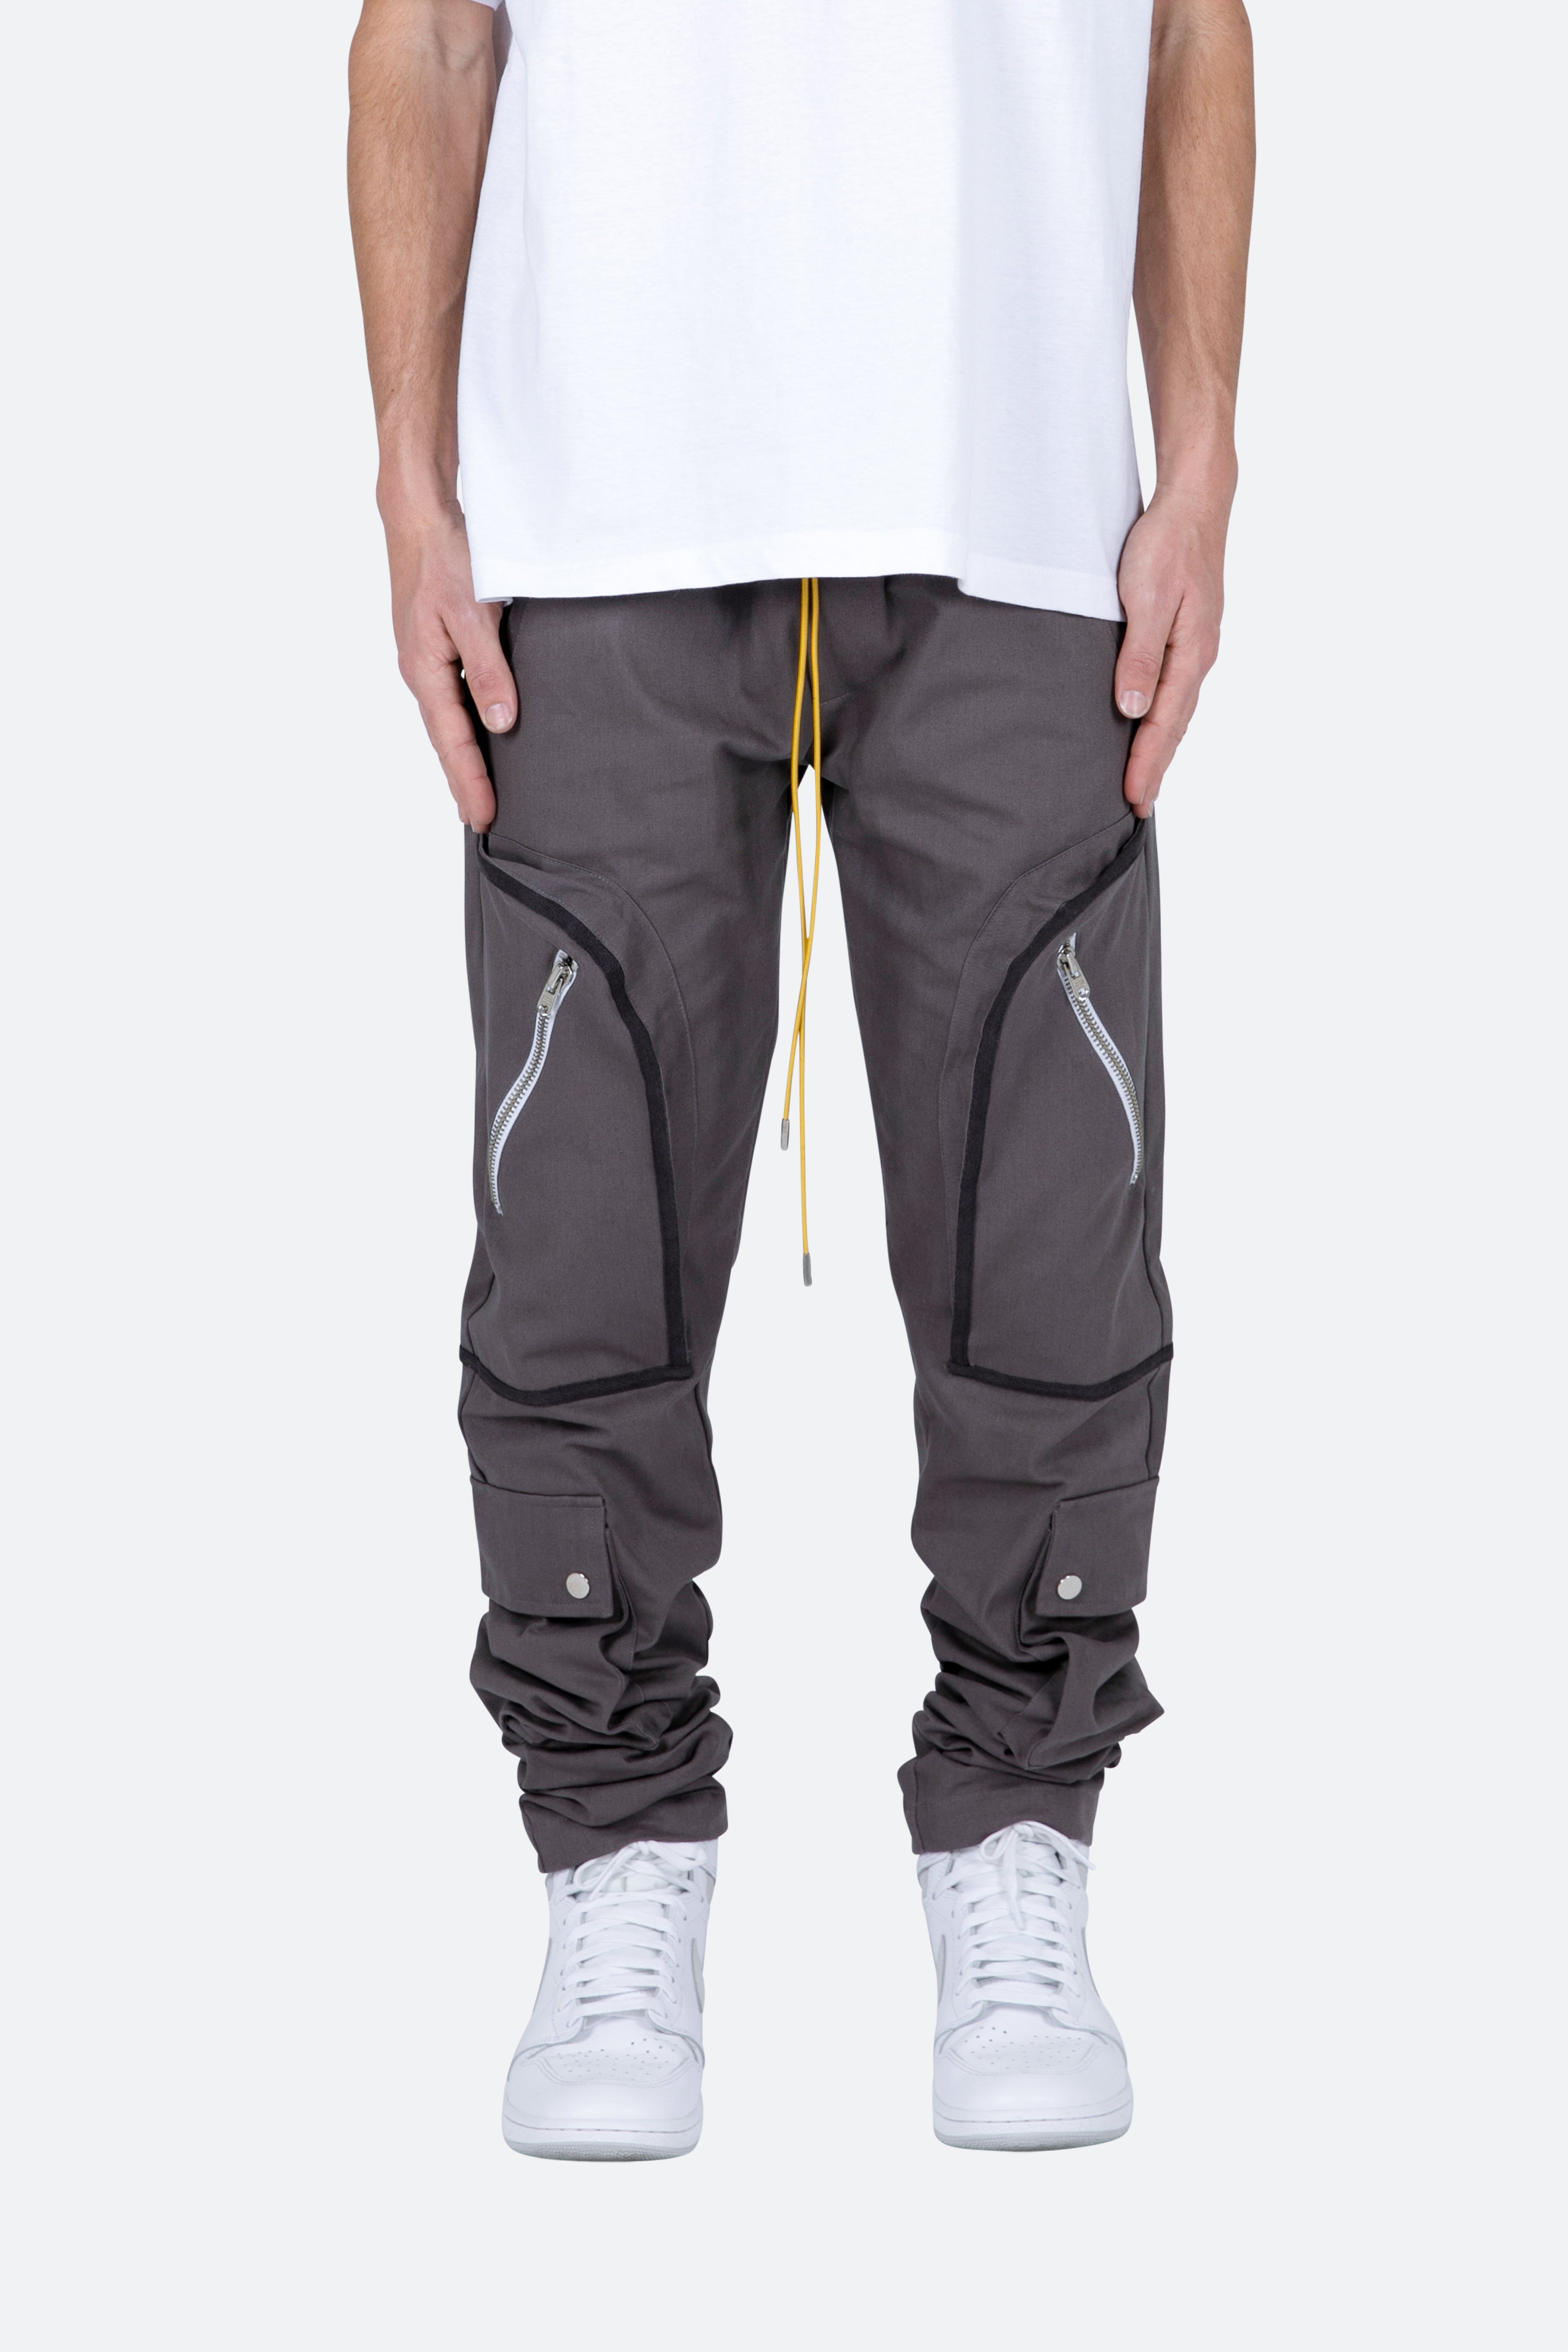 Contrast Taped Cargo Pants - Charcoal Grey